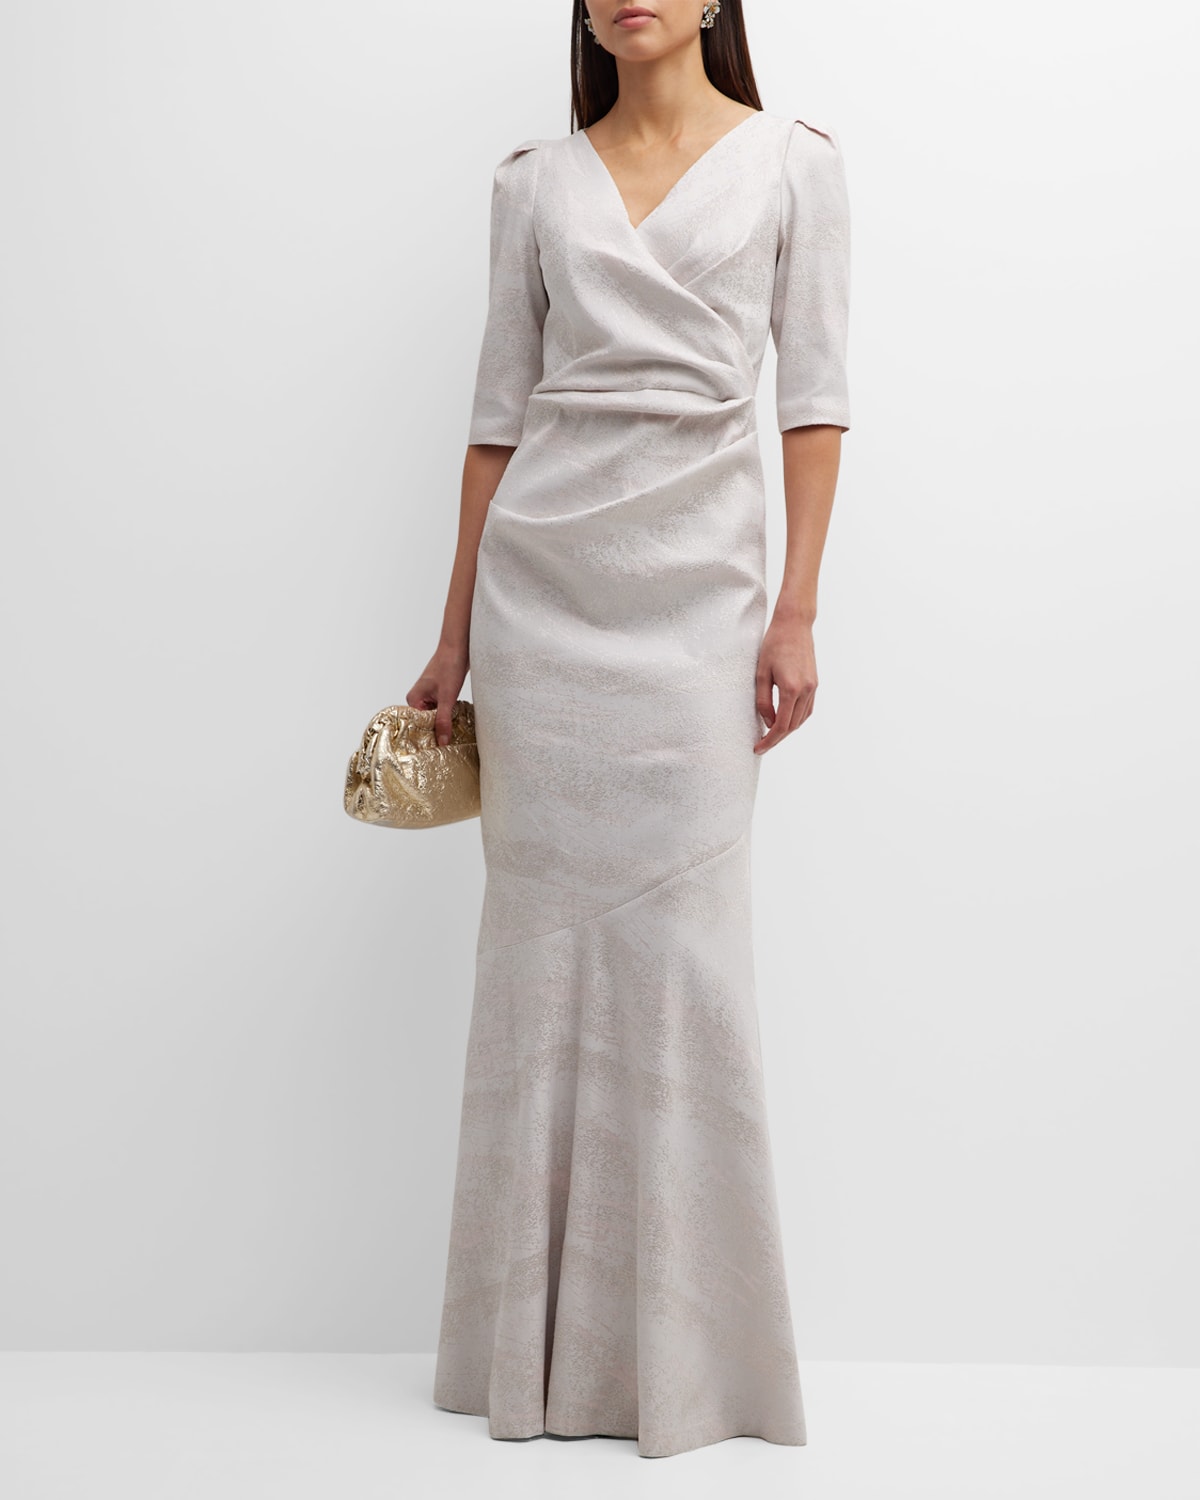 Rickie Freeman for Teri Jon Ruched Elbow-Sleeve Jacquard Gown | Neiman ...